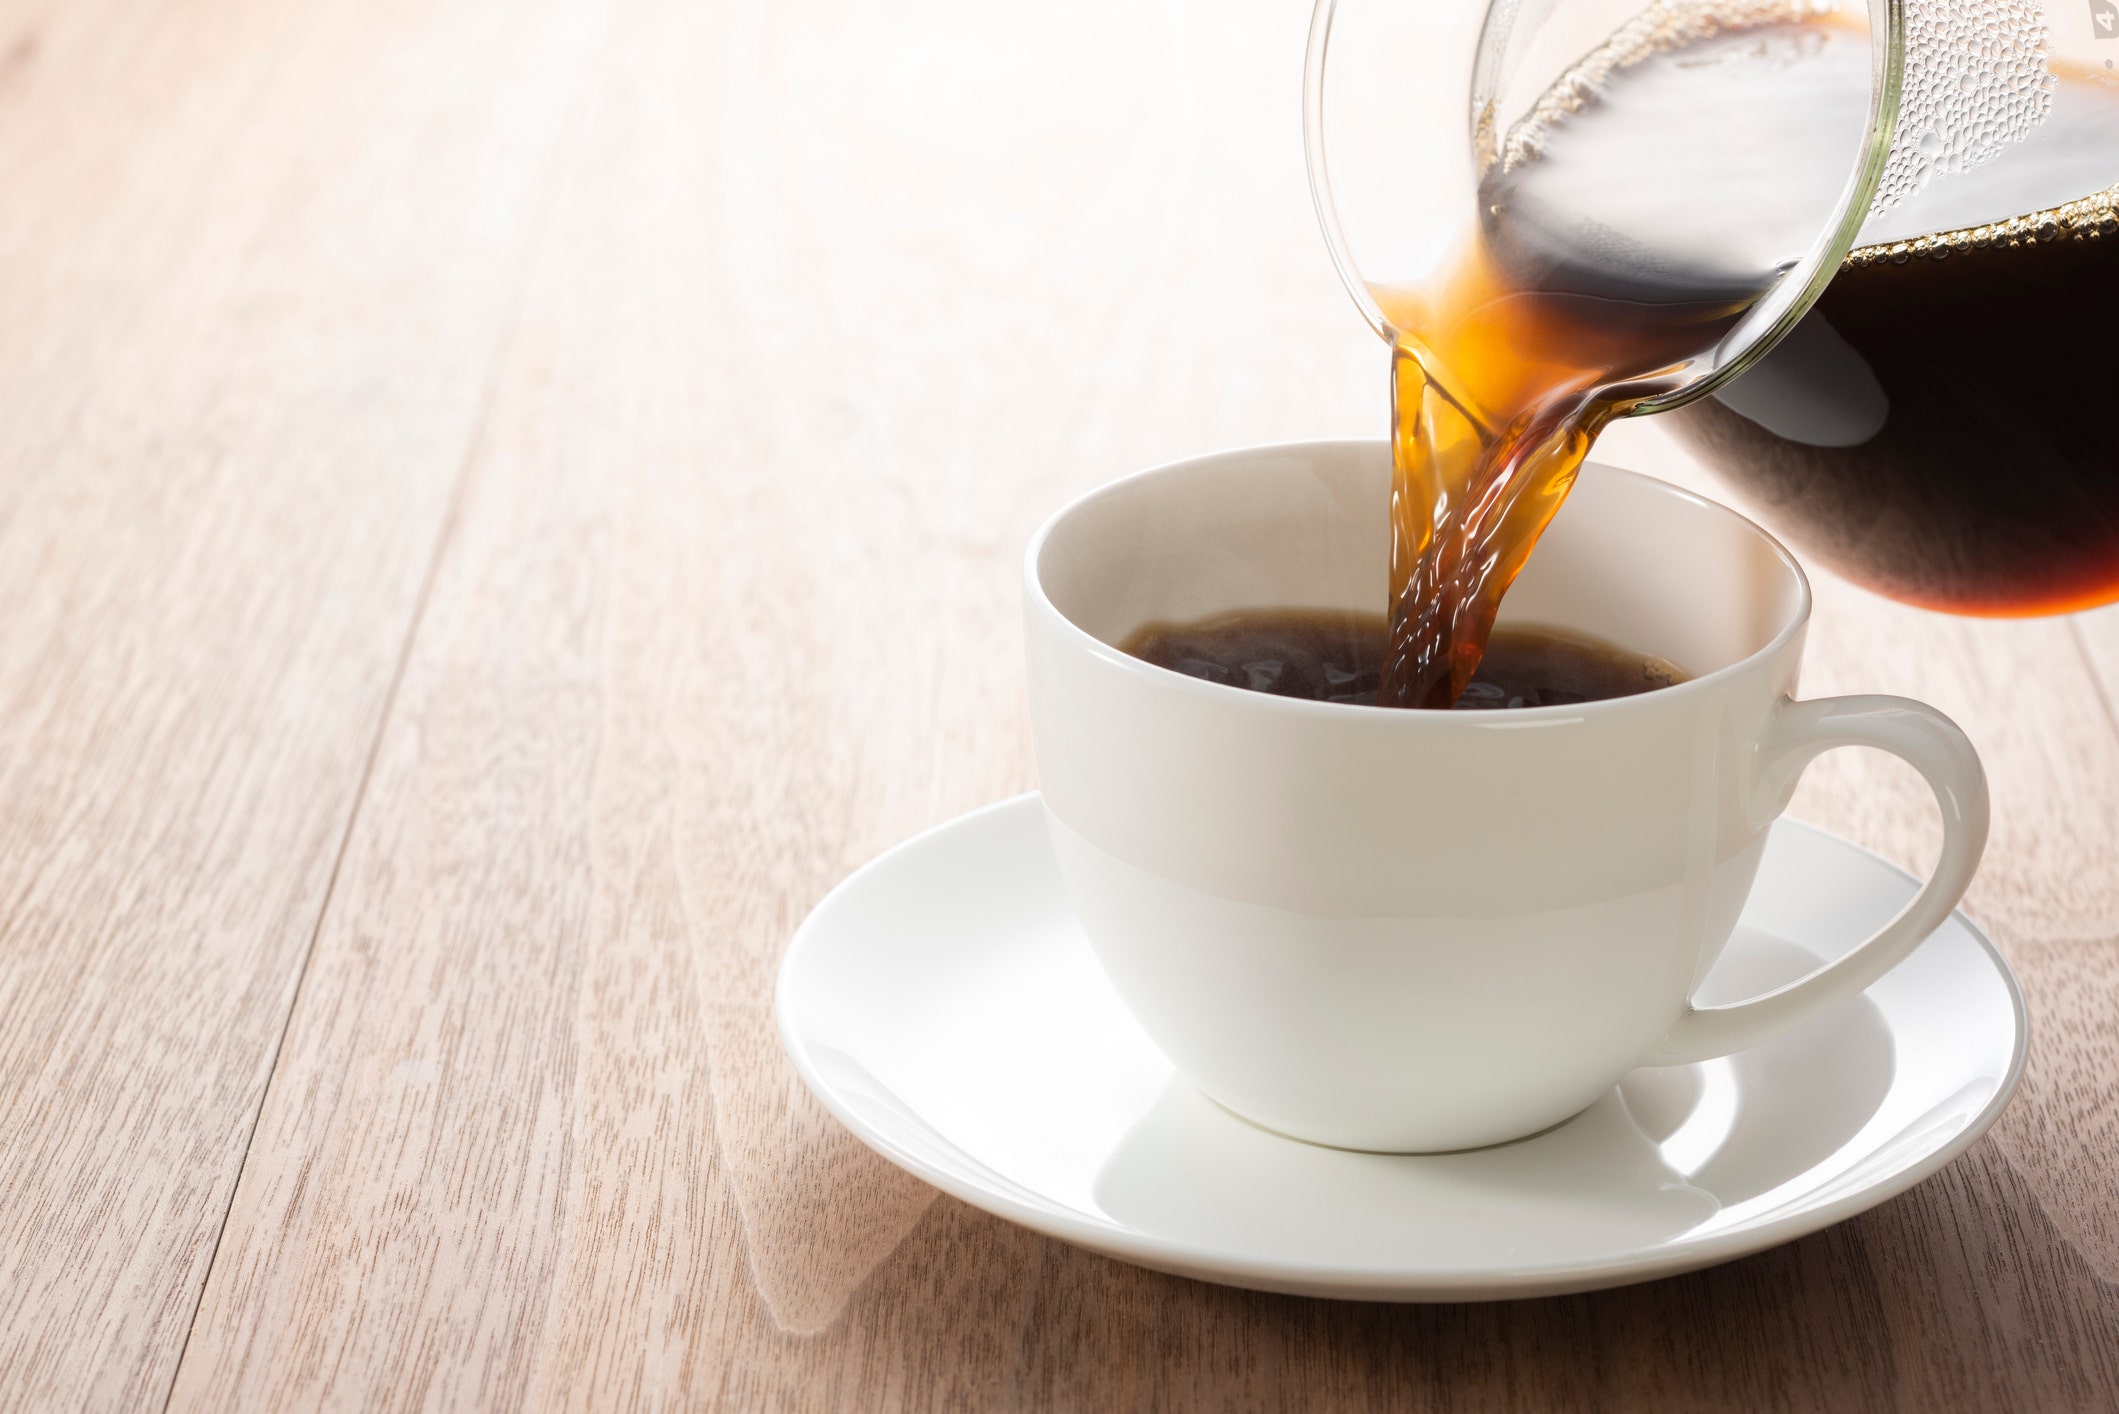 Coffee may protect your liver, new study suggests